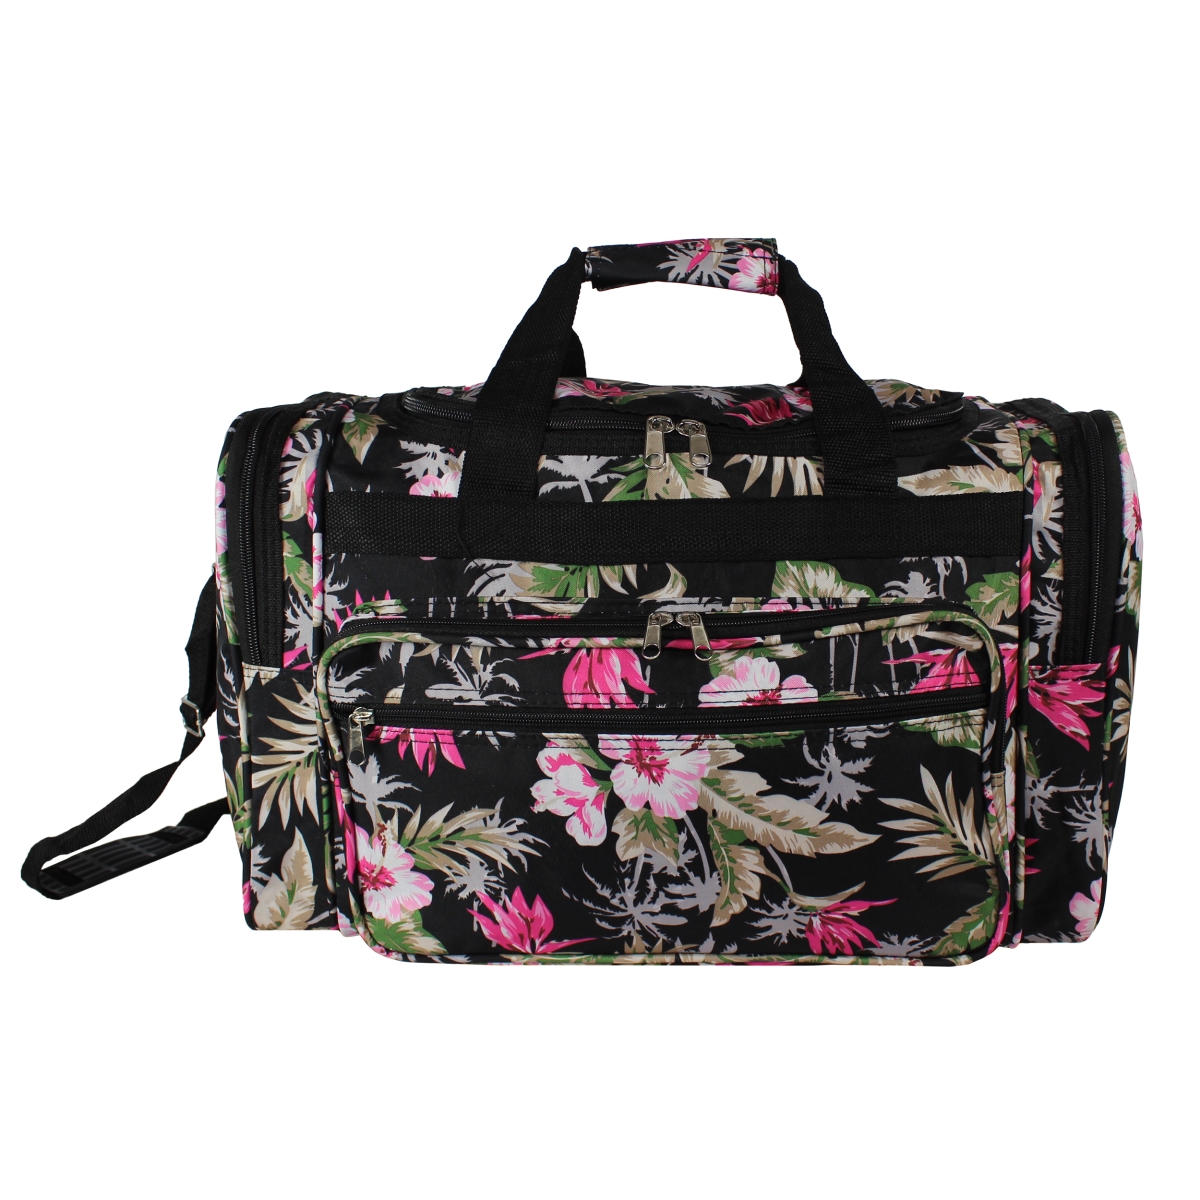 81t19-228 19 In. Carry-on Duffel Bag - Tropical Flowers